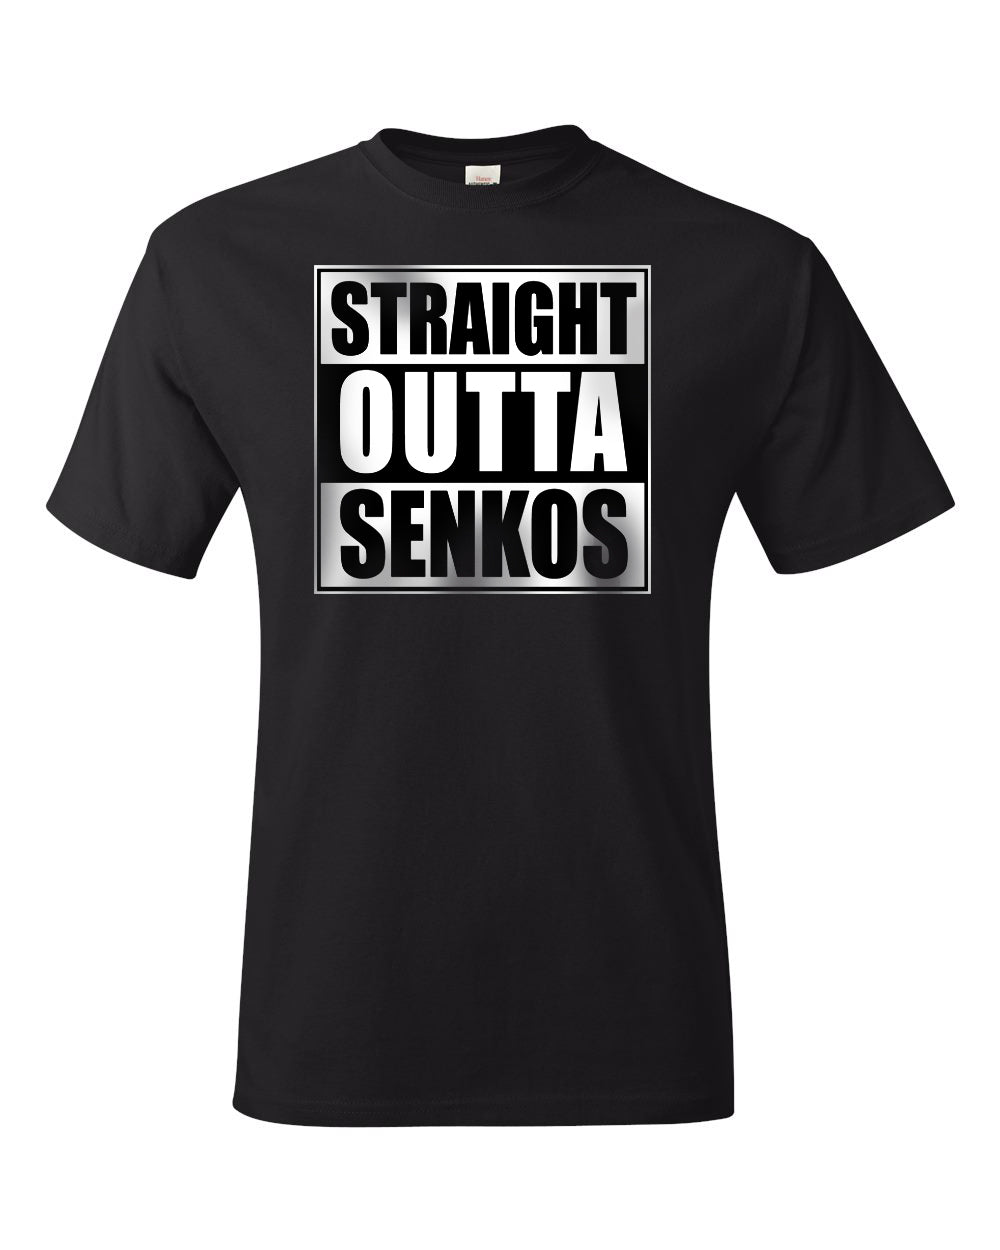 Straight outta Senkos by IF